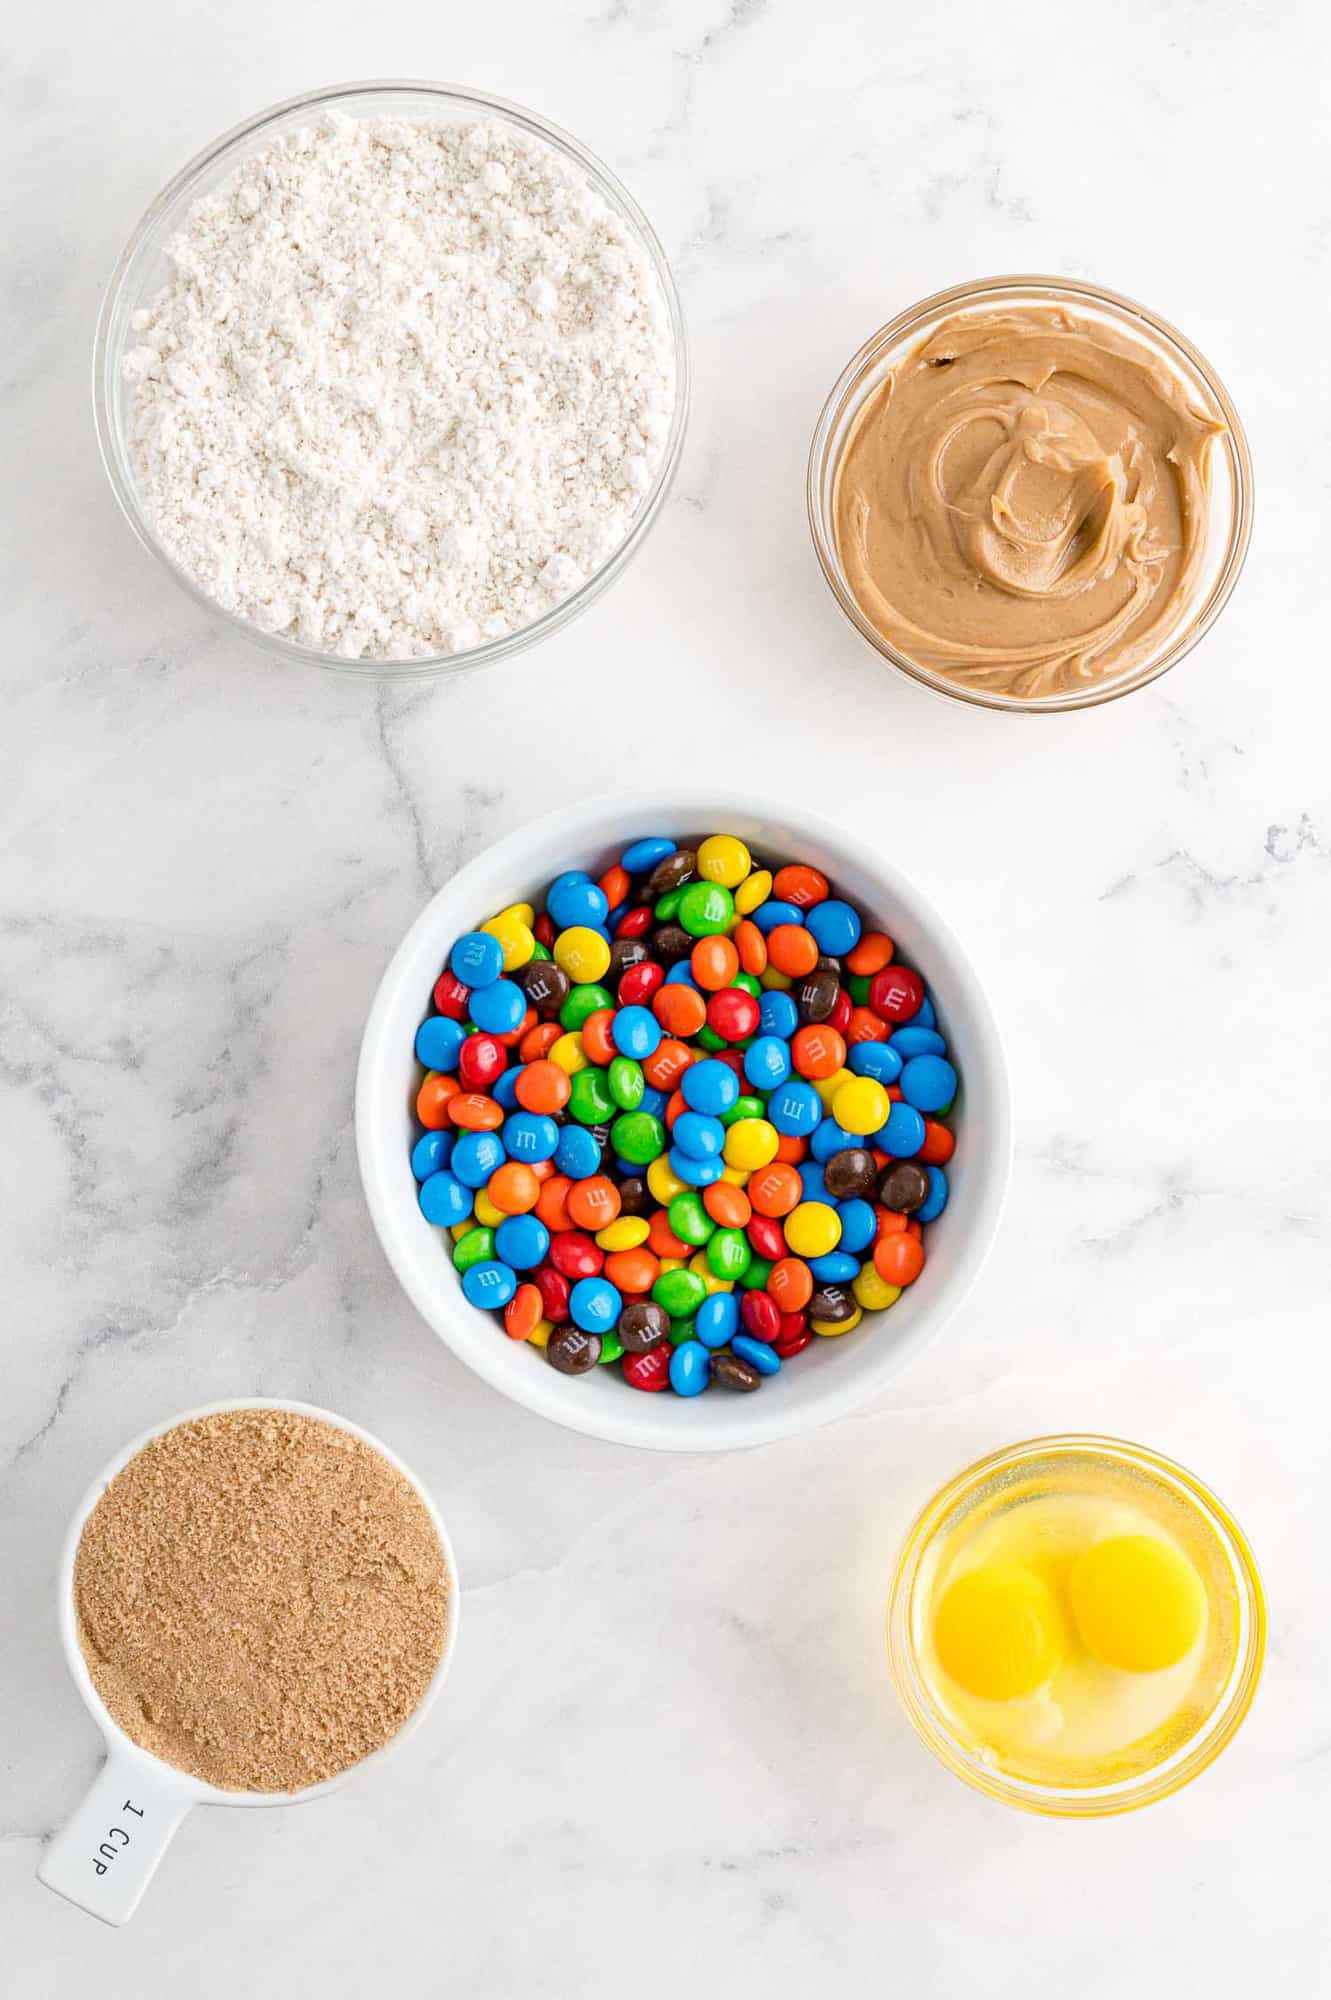 Overhead view of ingredients including peanut butter and M&Ms.